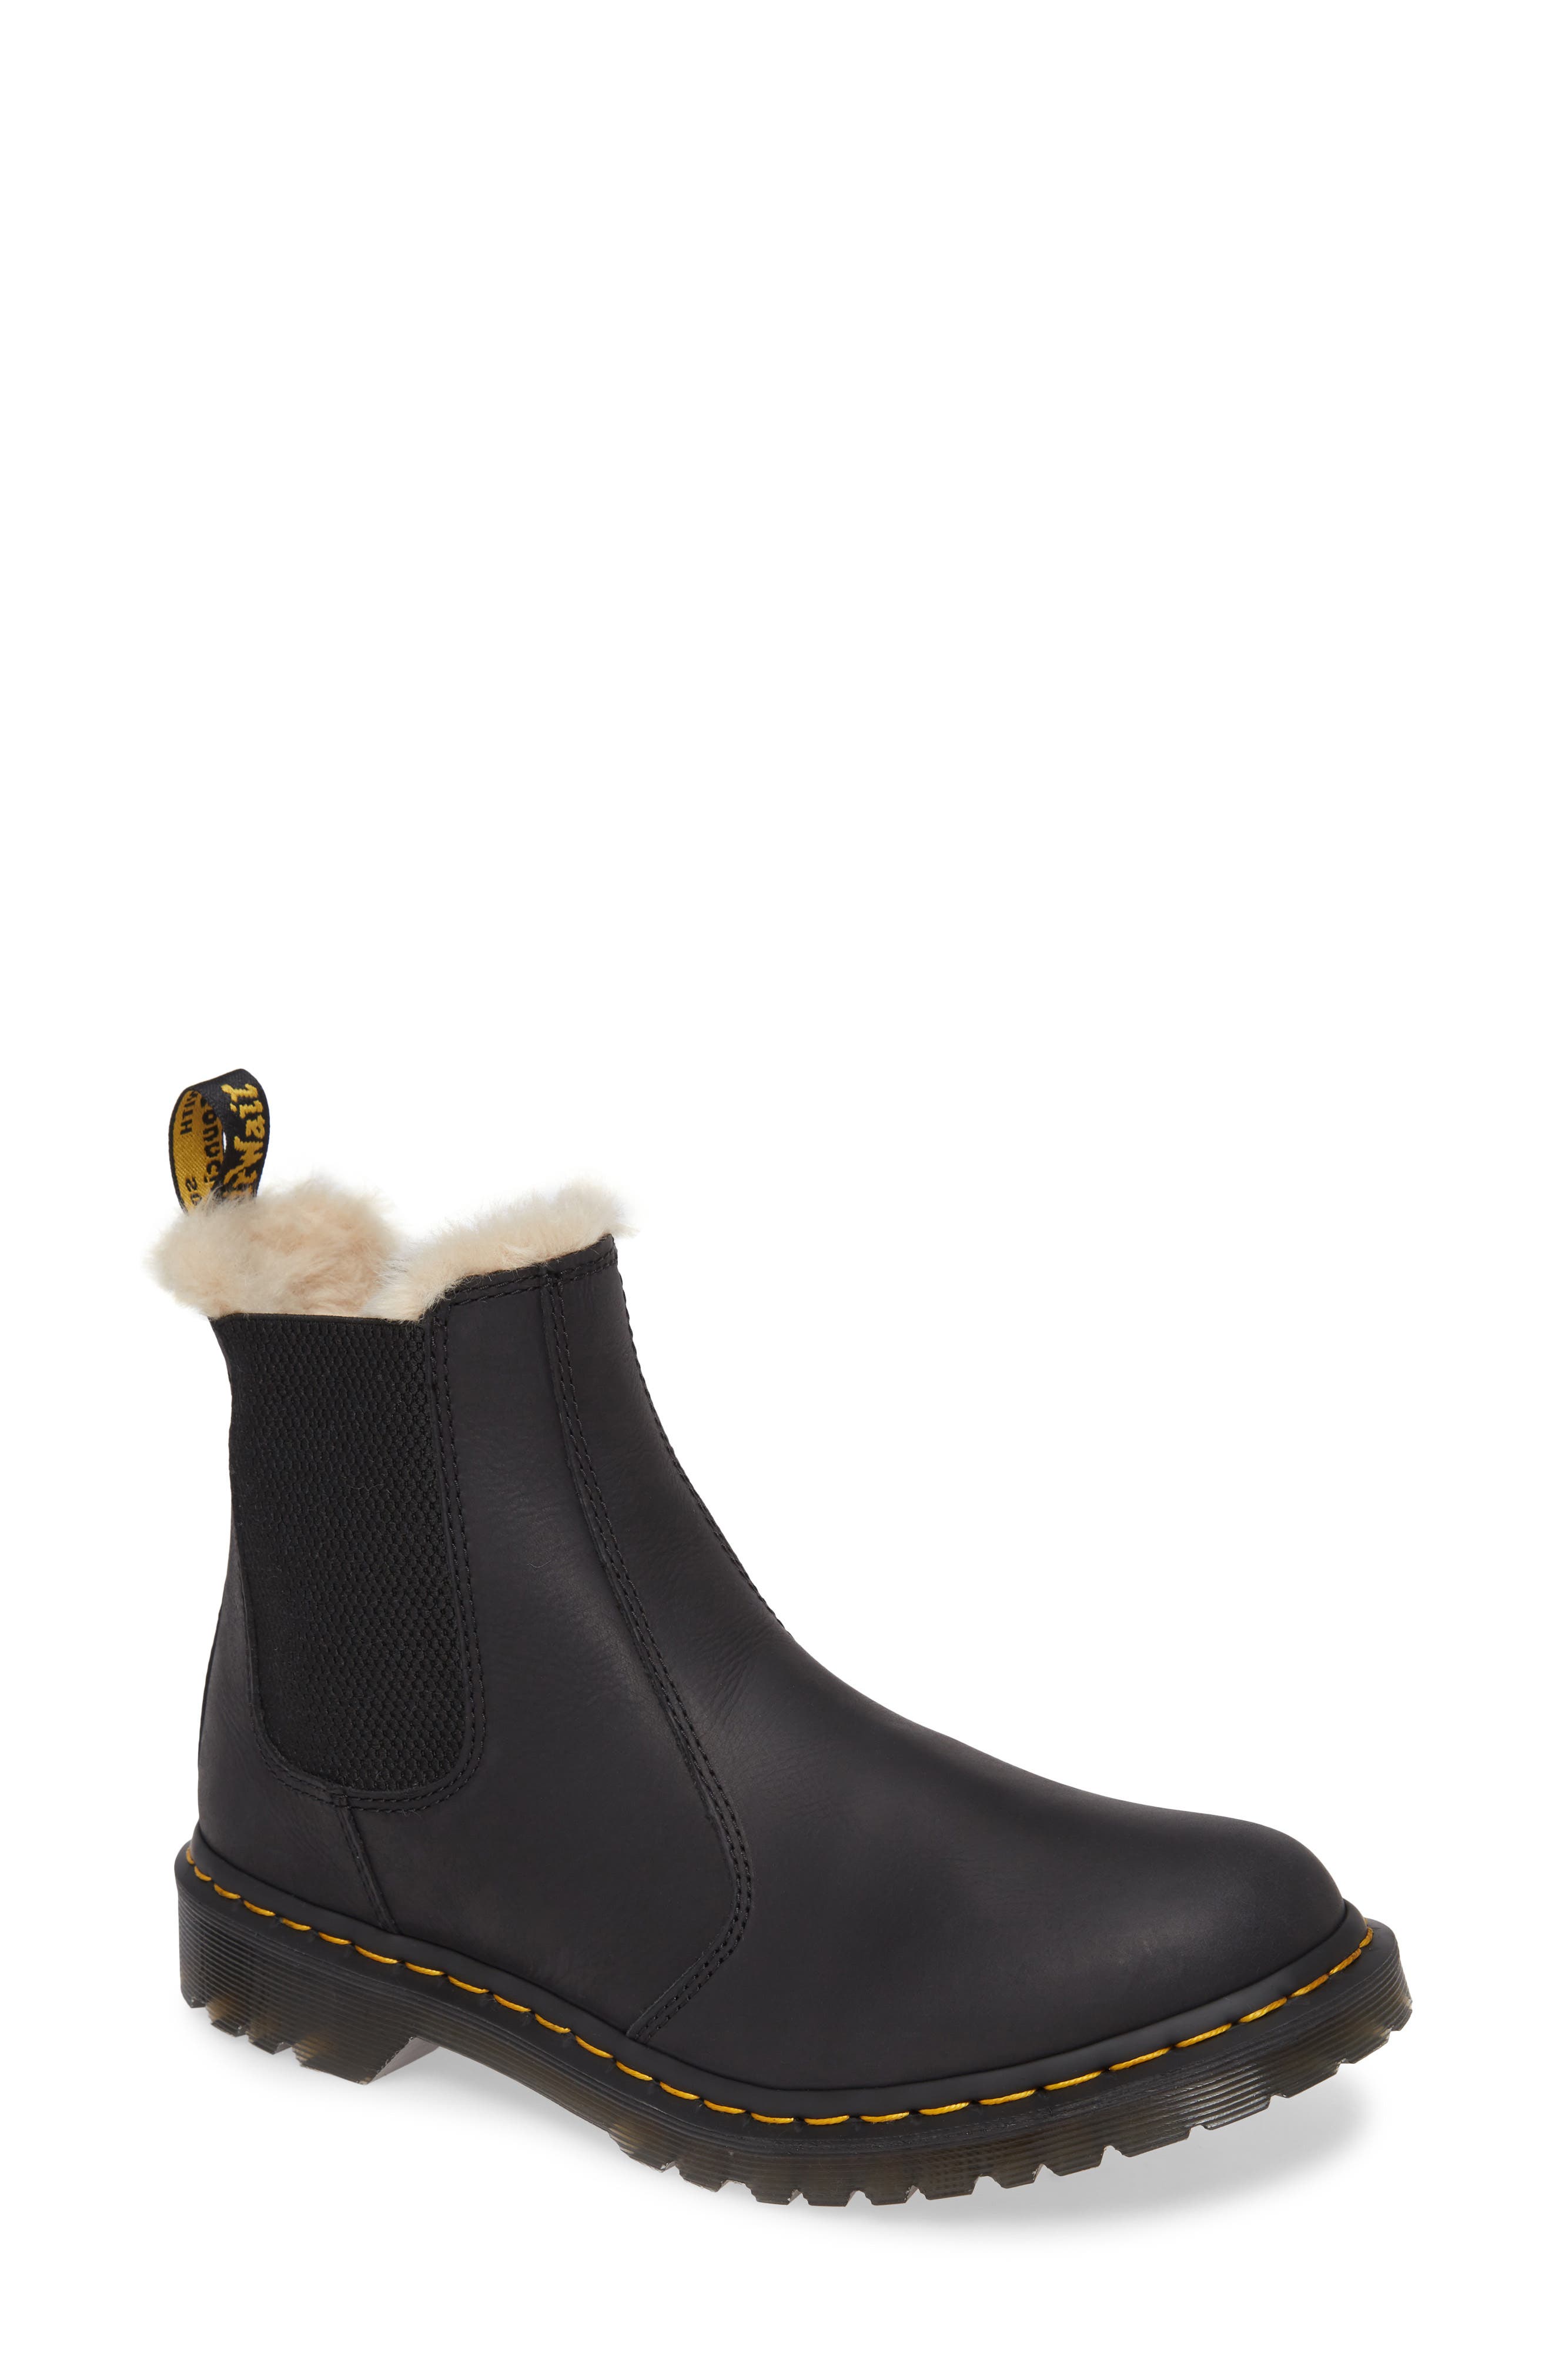 shearling lined doc martens